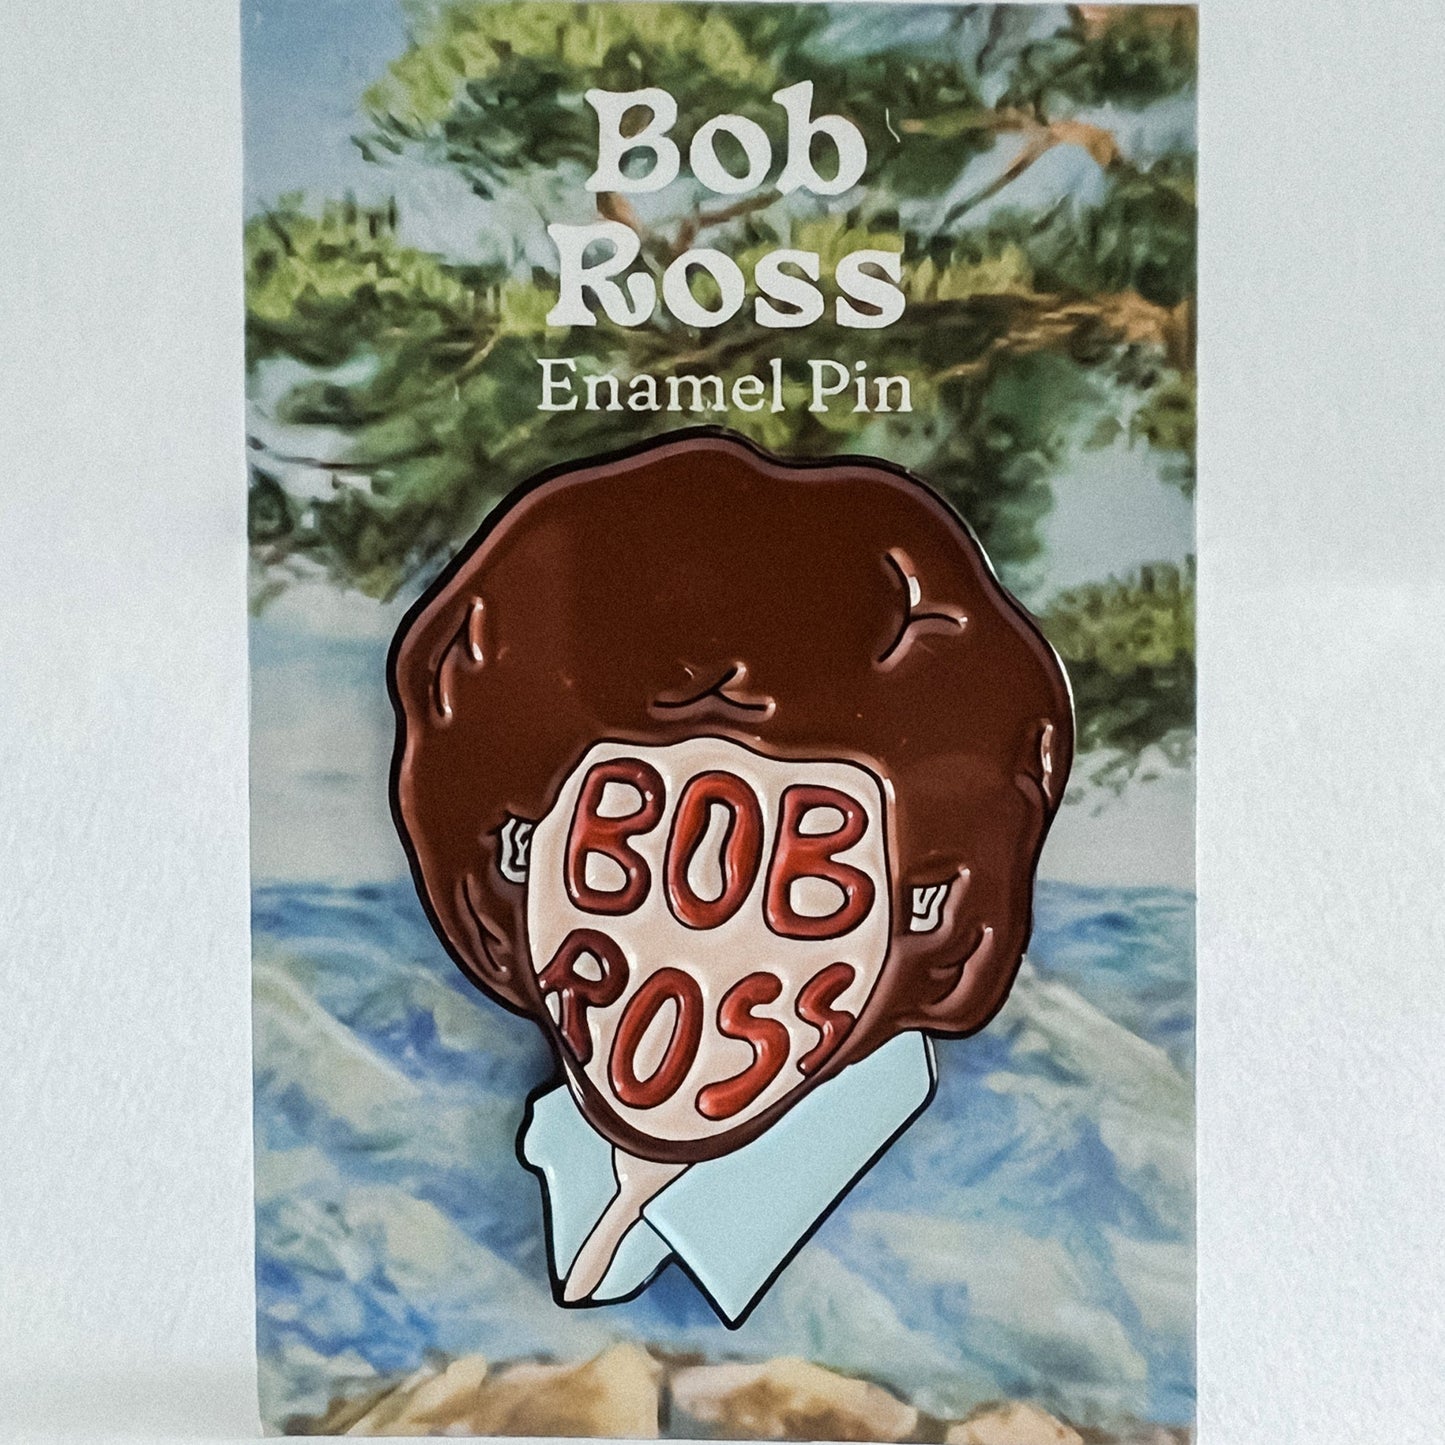 Soft Enamel Pin on Backing Card with "Bob Ross Enamel Pin" Text